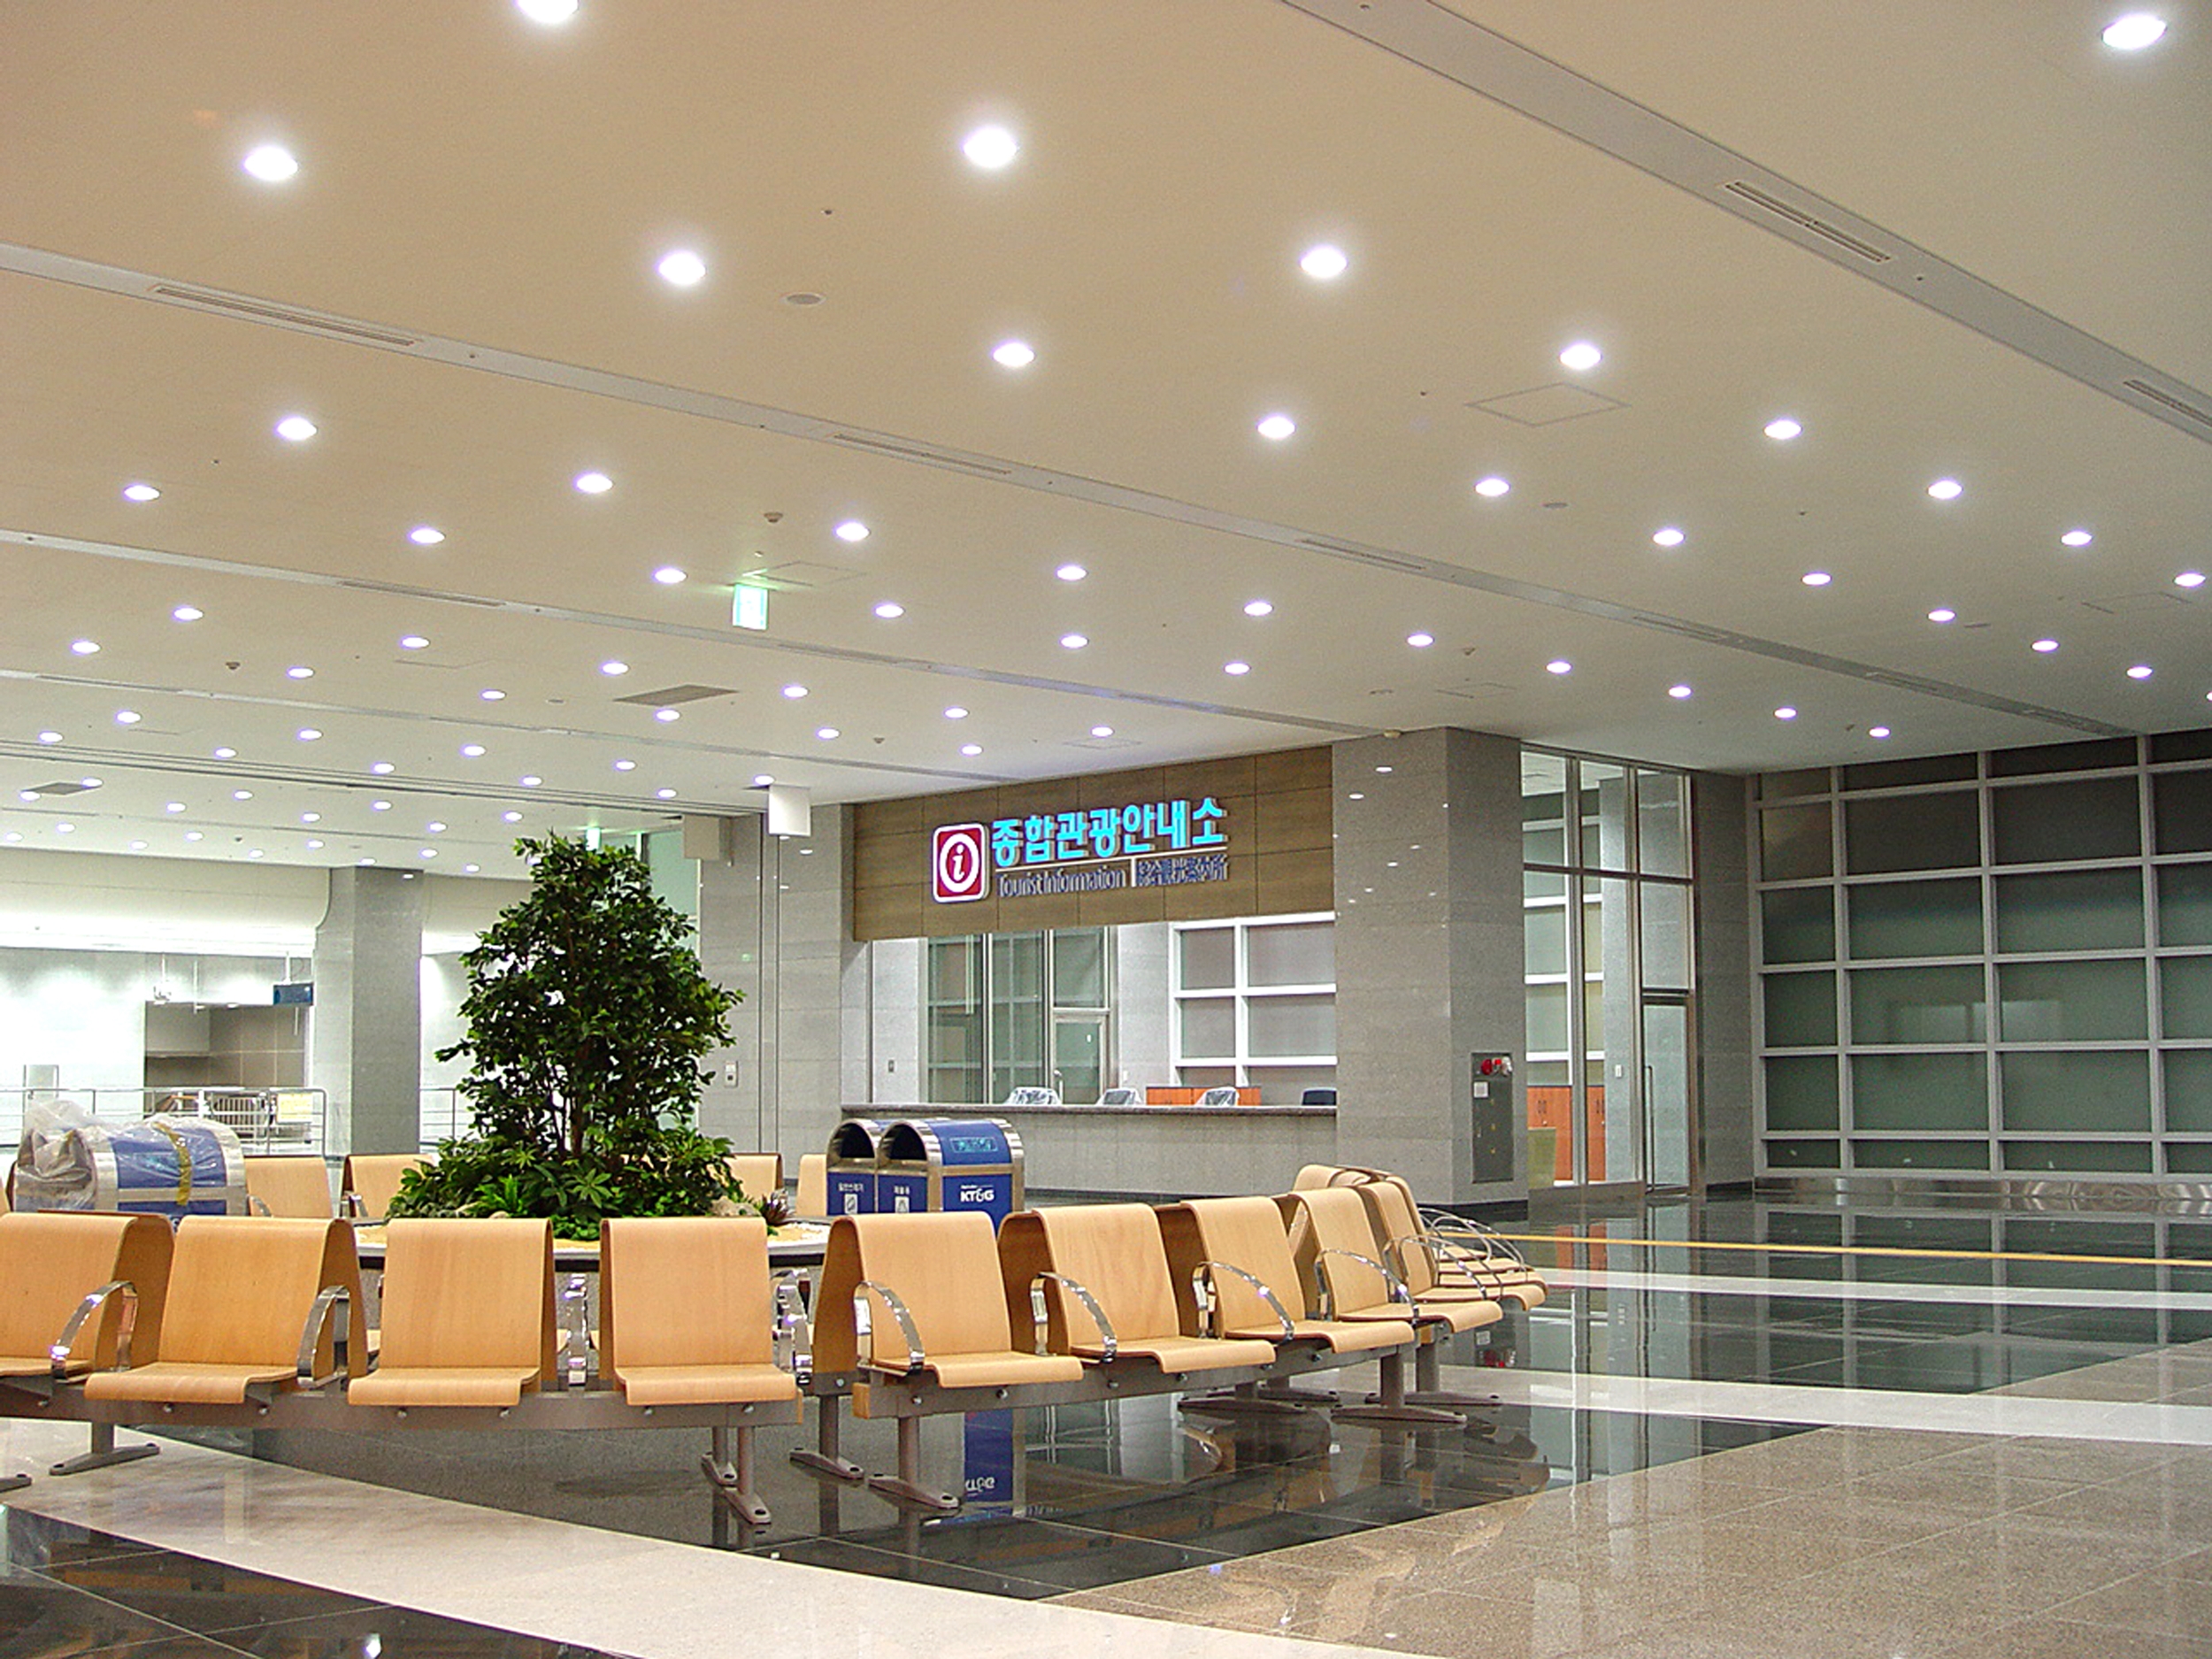 Lobby area is constructed using suspended ceiling with downlights